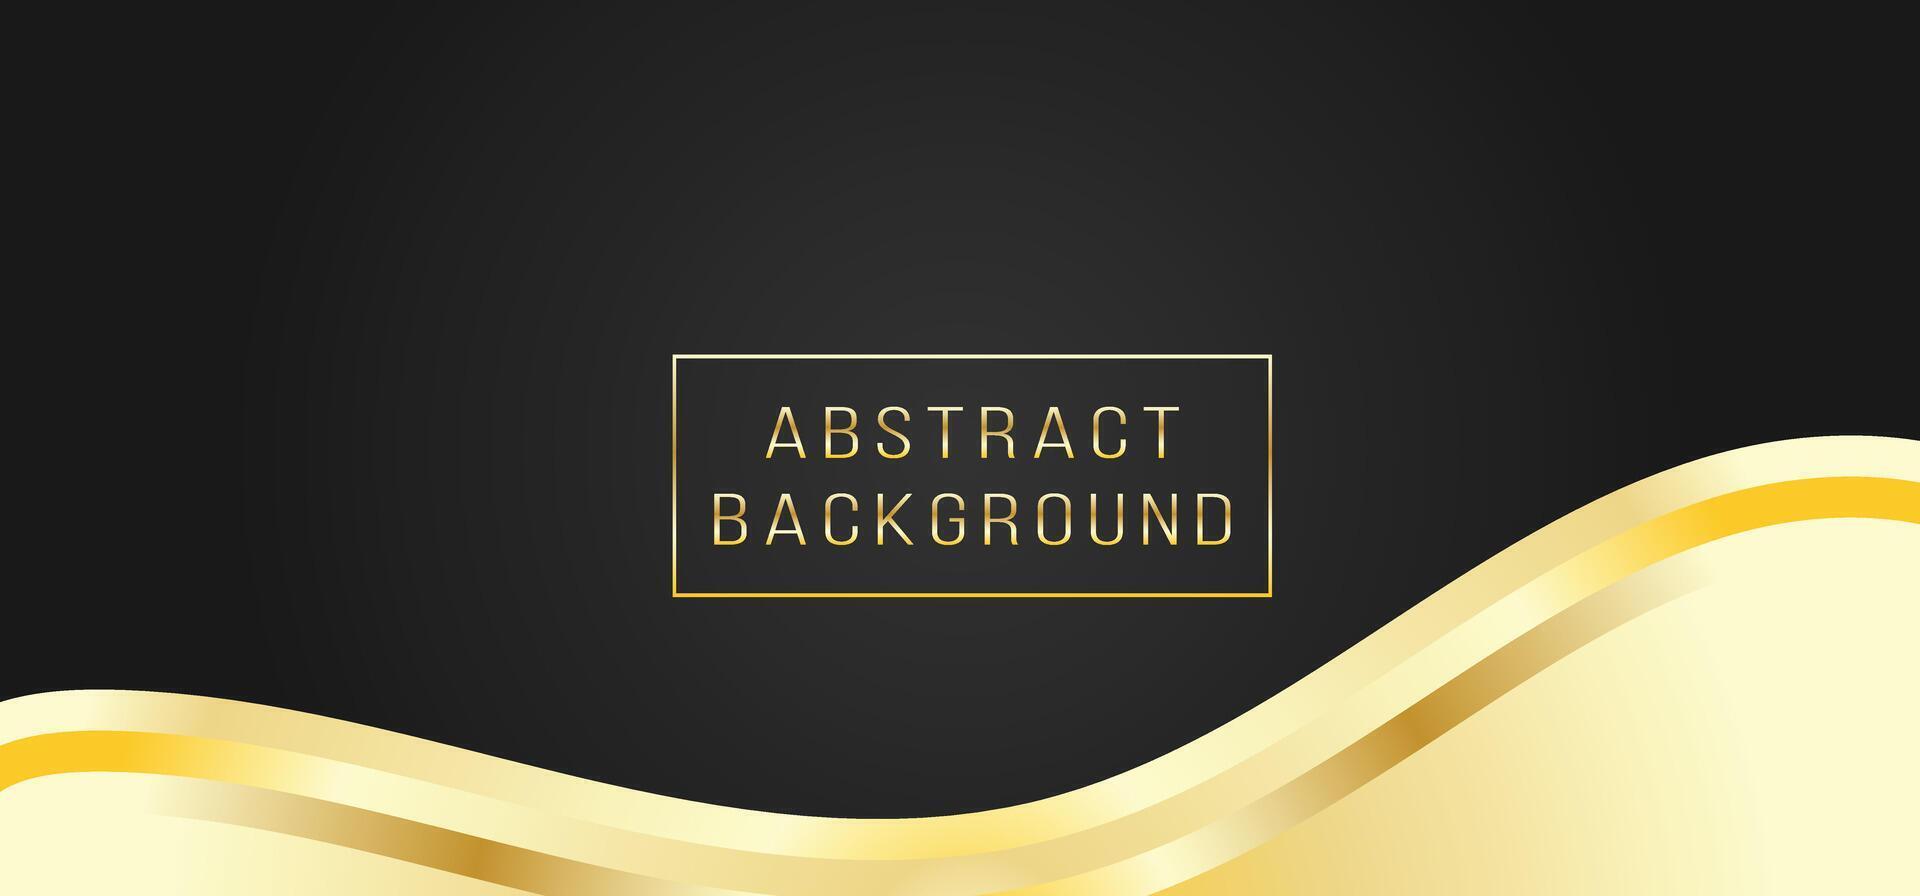 abstract black background gold wave pattern vector